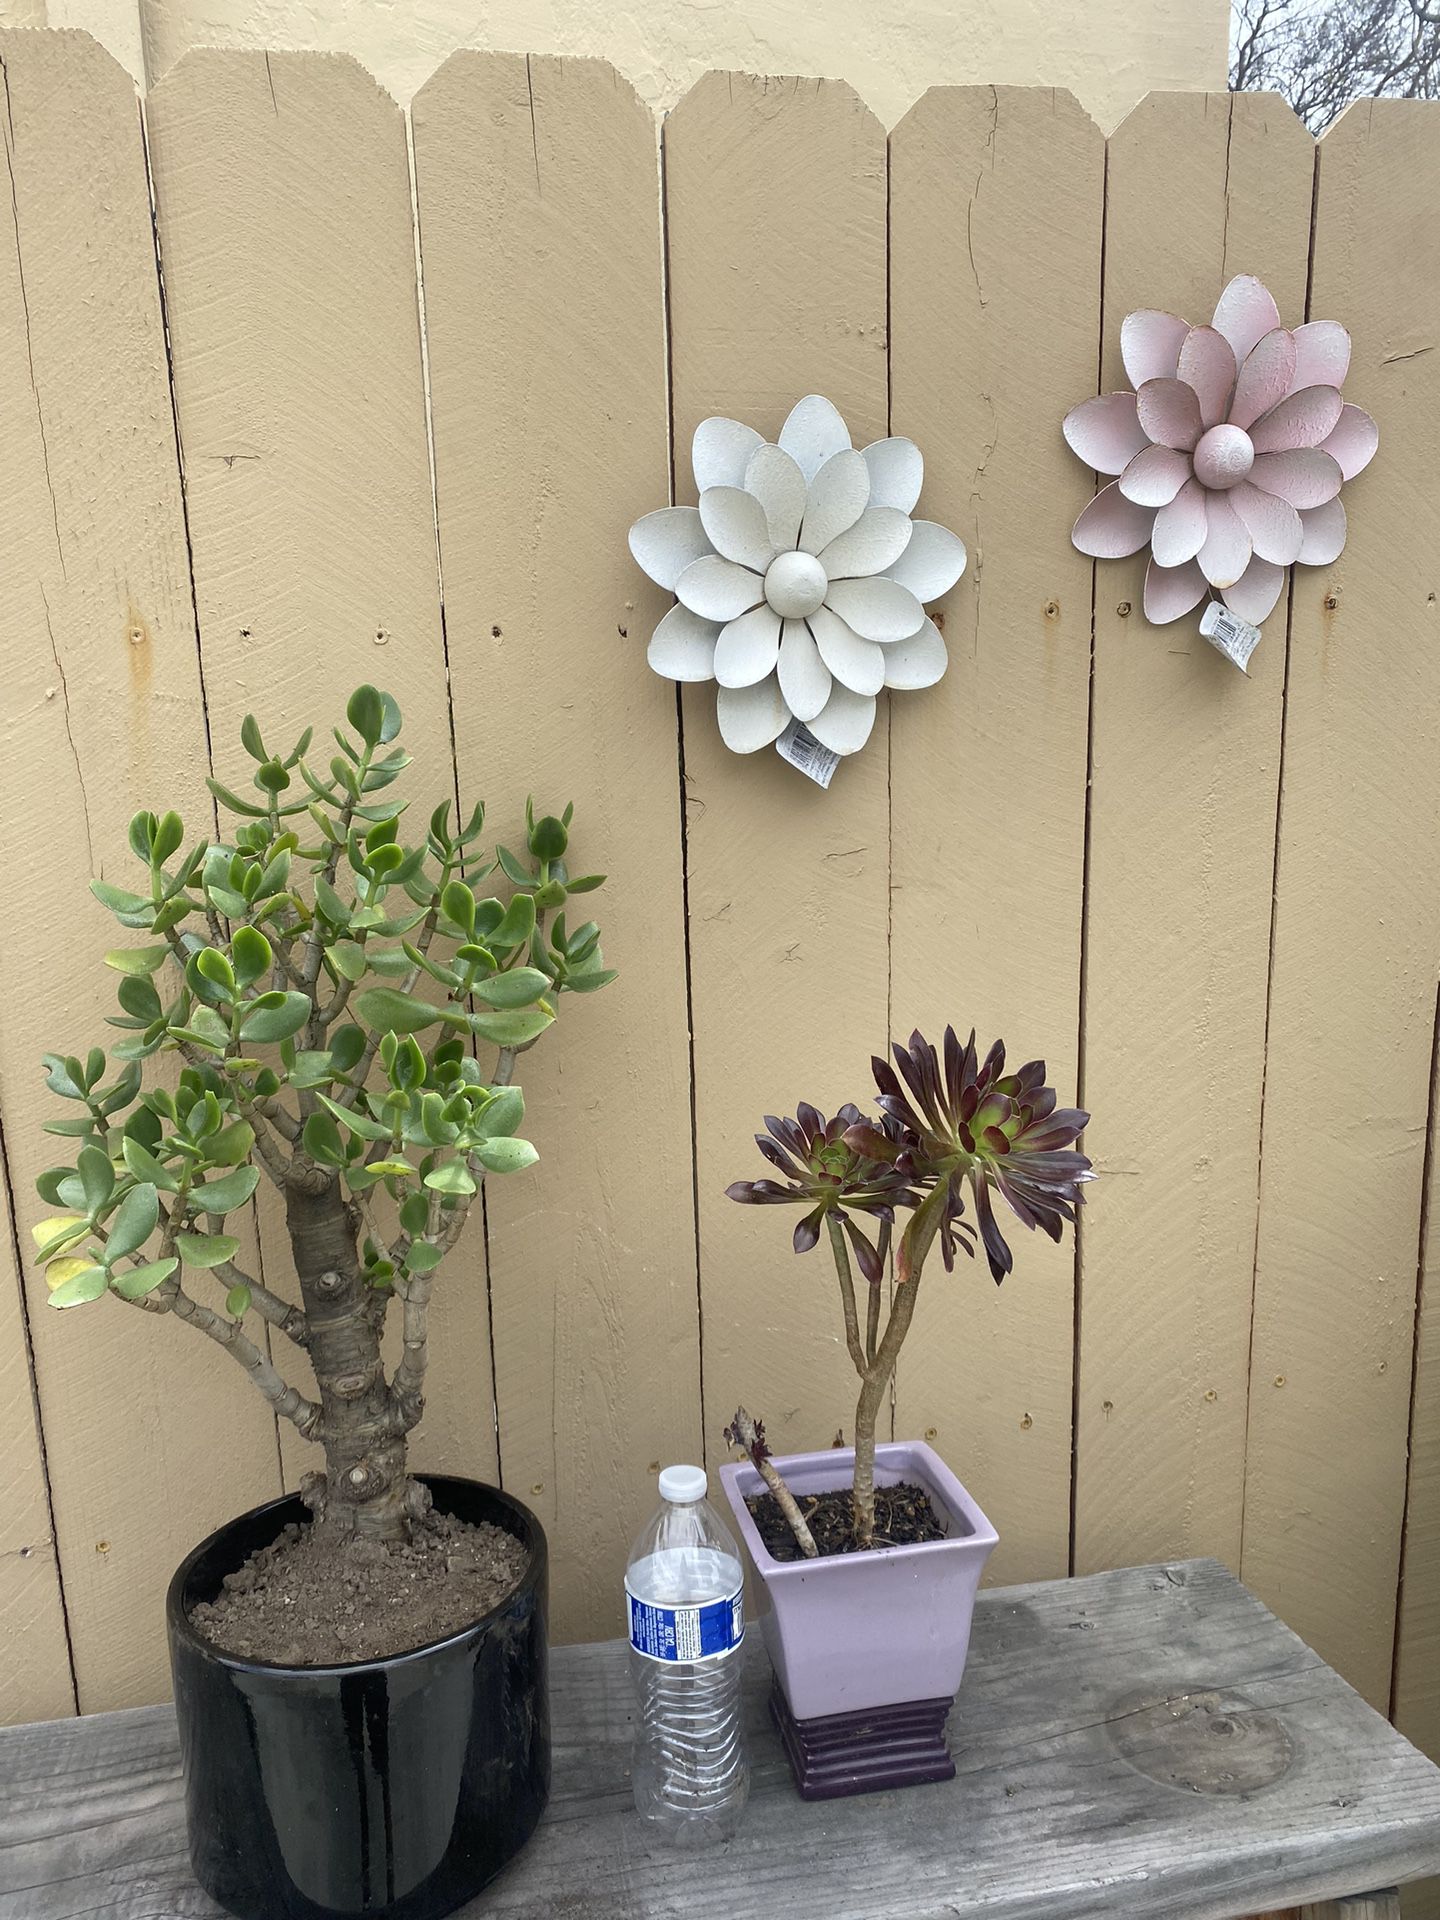 Succulent Lover Special Both For Just $10